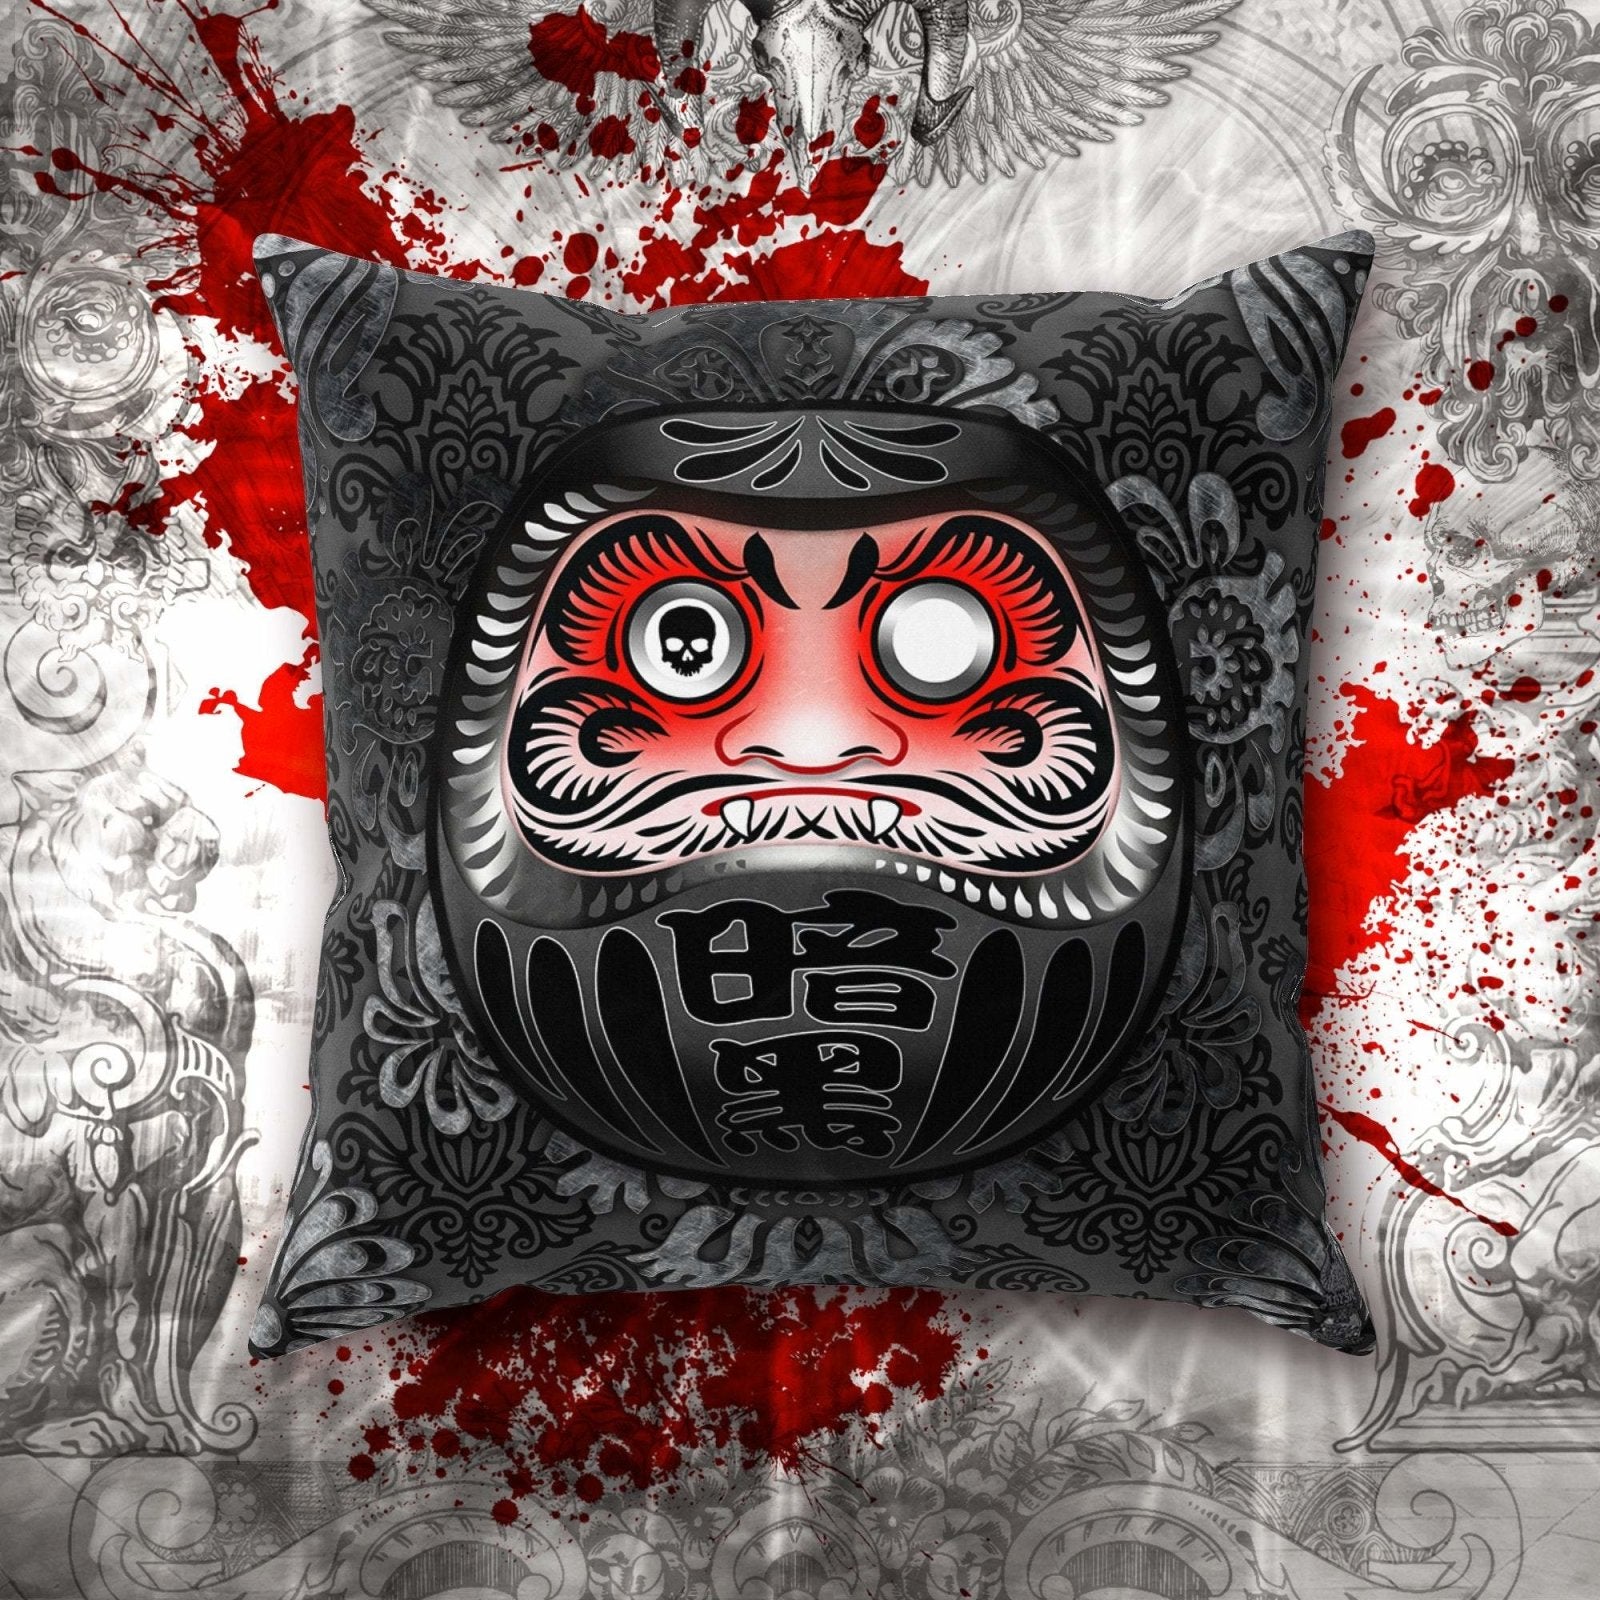 Black Daruma Throw Pillow, Decorative Accent Pillow, Square Cushion Cover,  Goth Japanese Art, Eclectic Room Decor